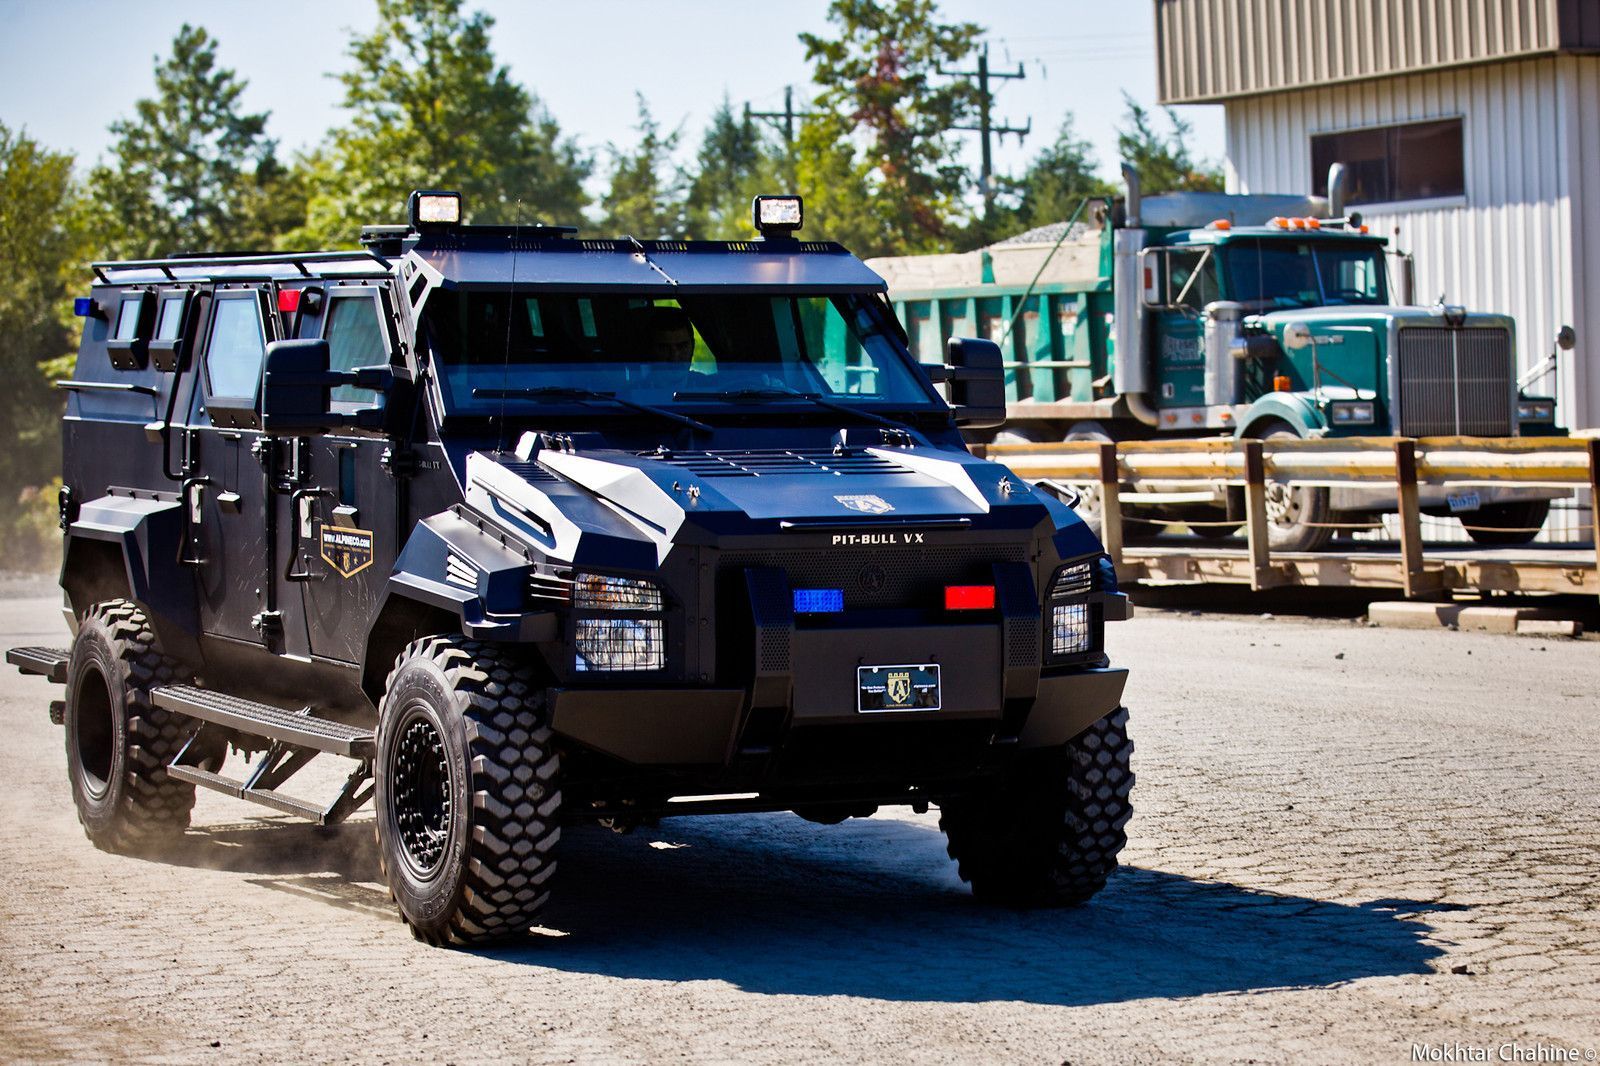 SWAT Exterior Gallery. Police truck, Police cars, Emergency vehicles